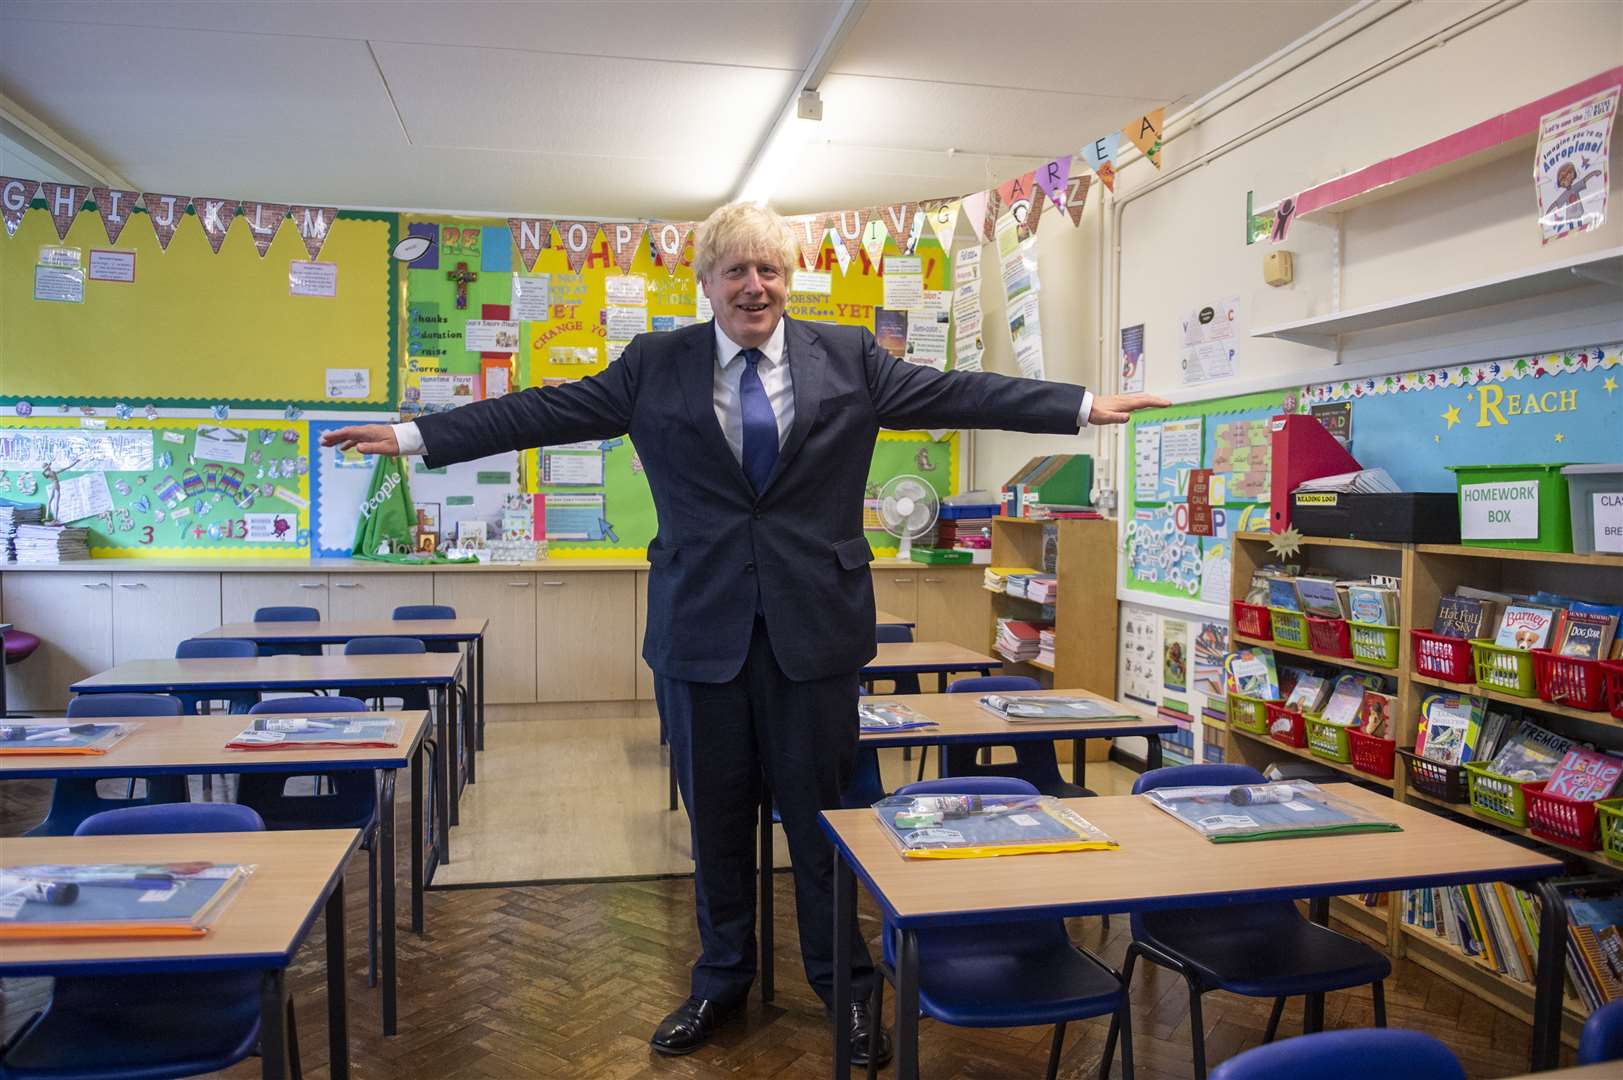 Prime Minister Boris Johnson told reporters that schools are safe (Lucy Young/Evening Standard/PA)